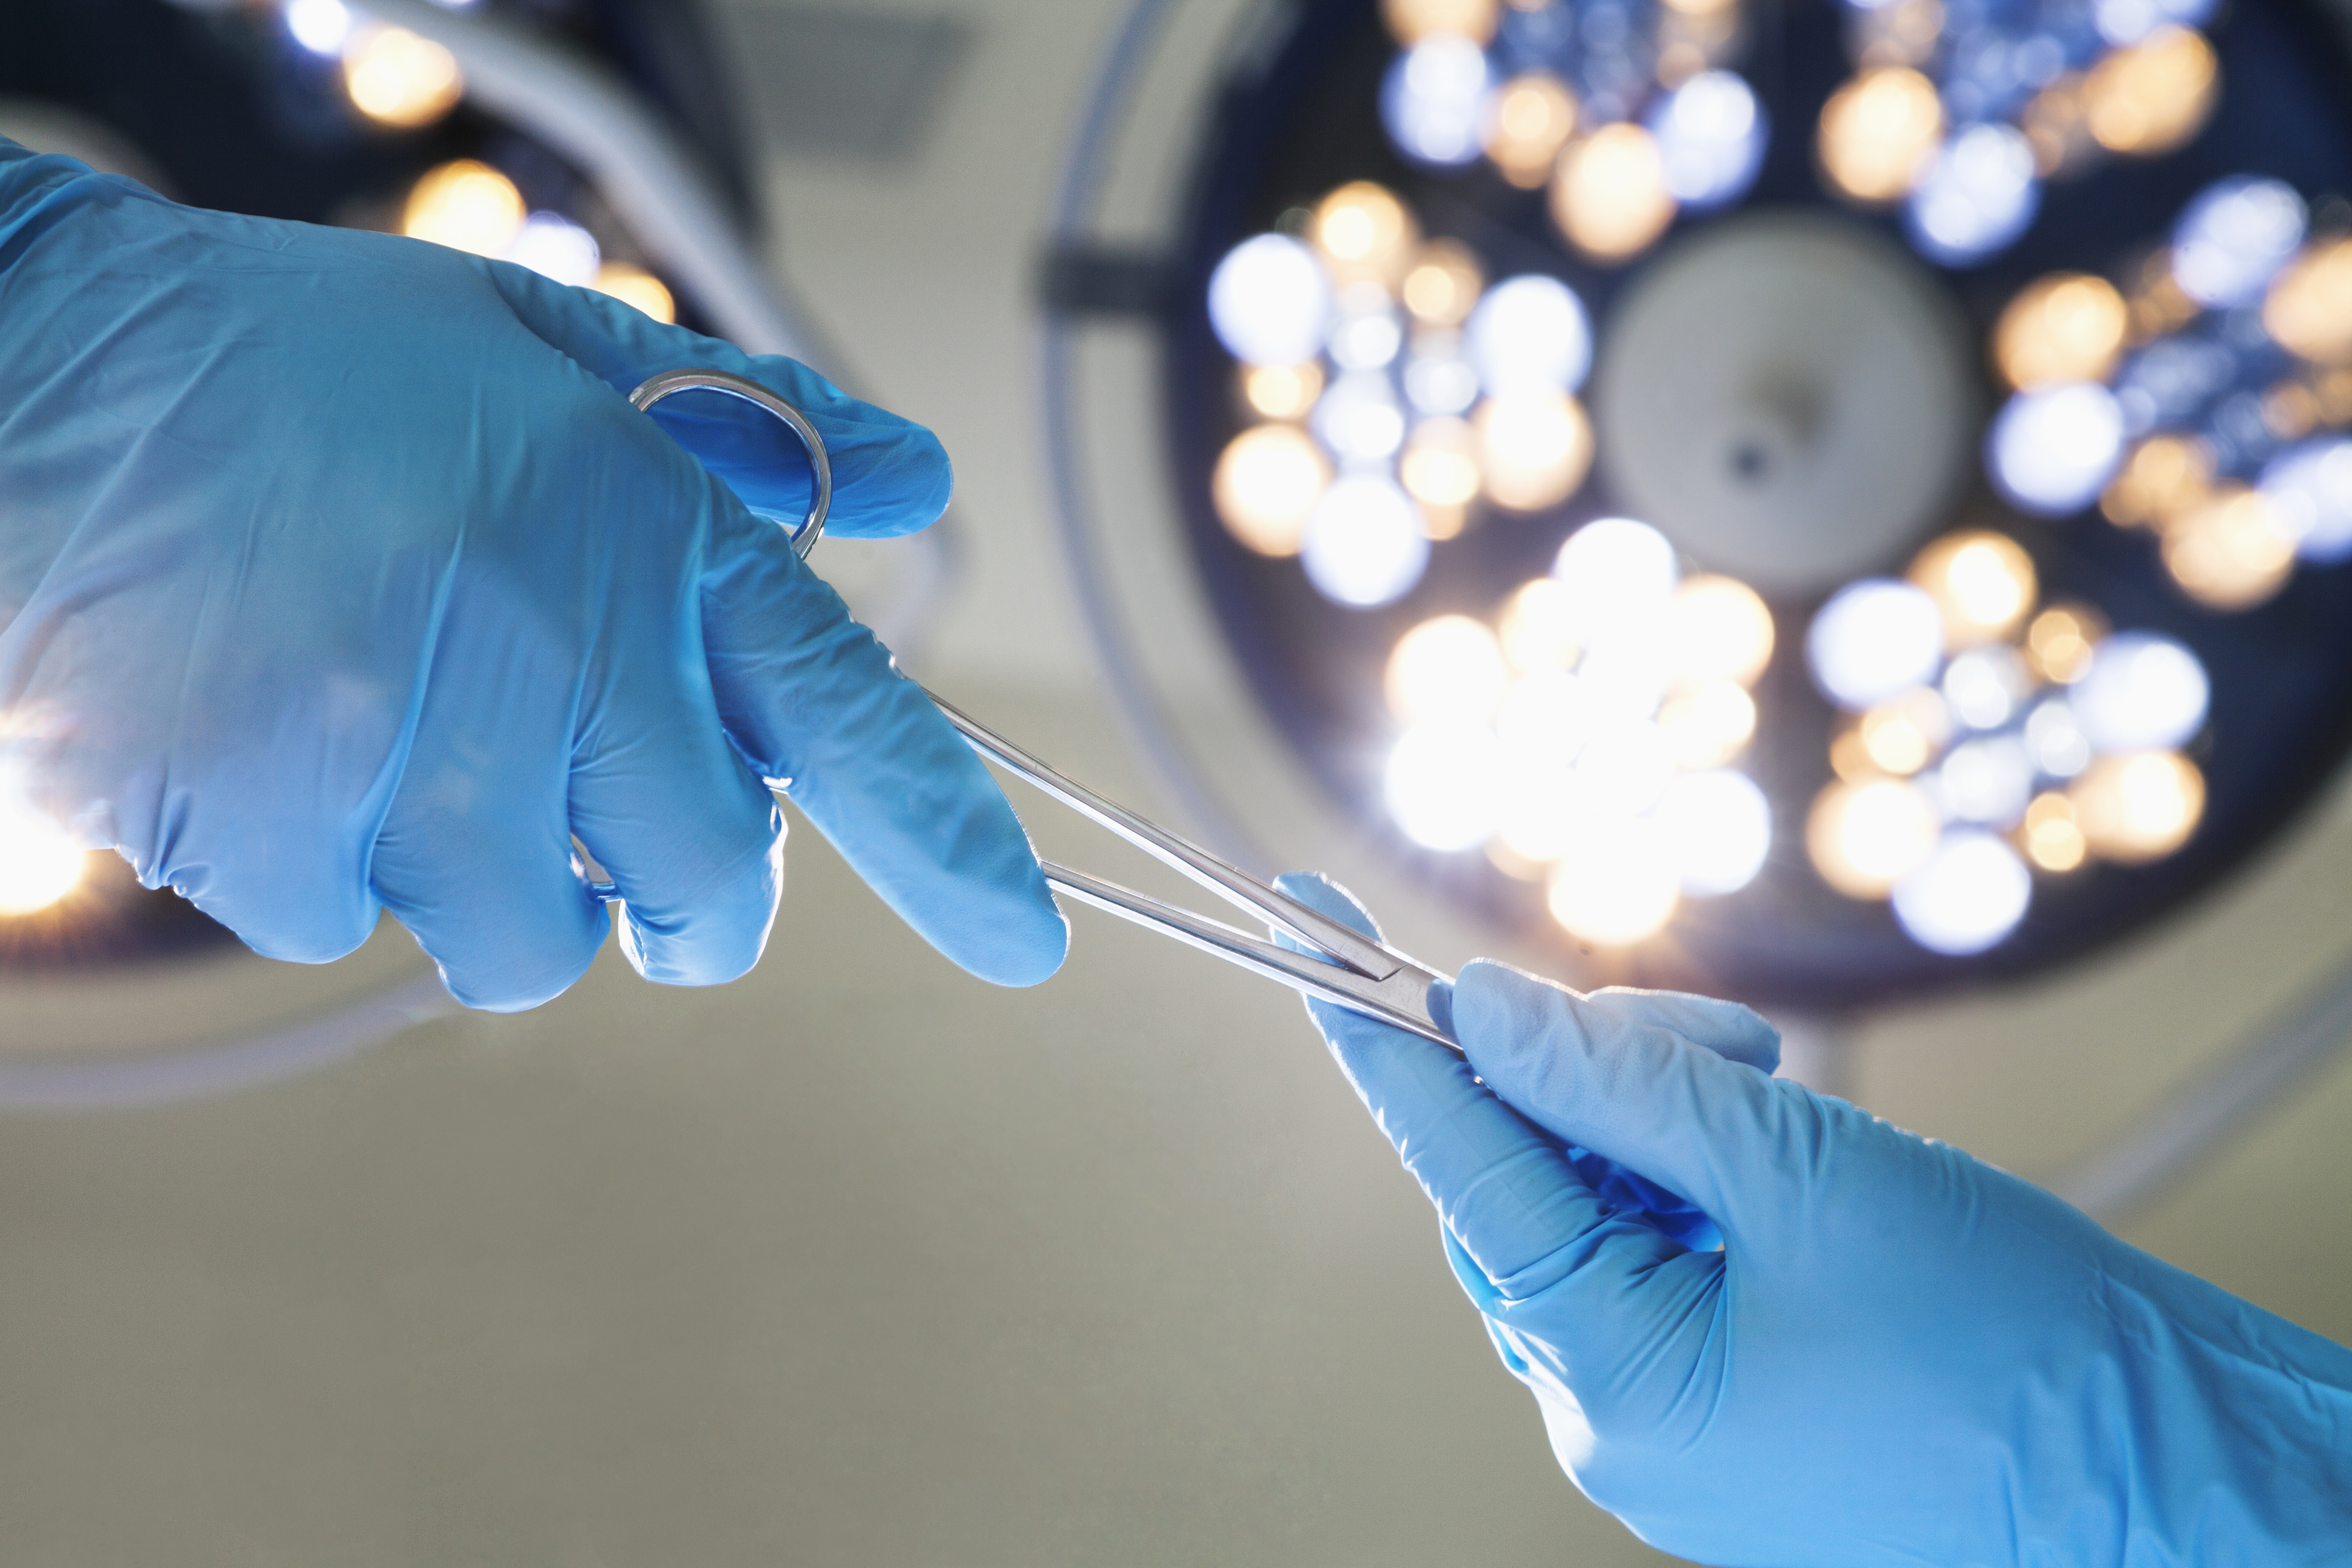 A surgeon in blue gloves hands a medical instrument to another surgeon under bright operating room lights